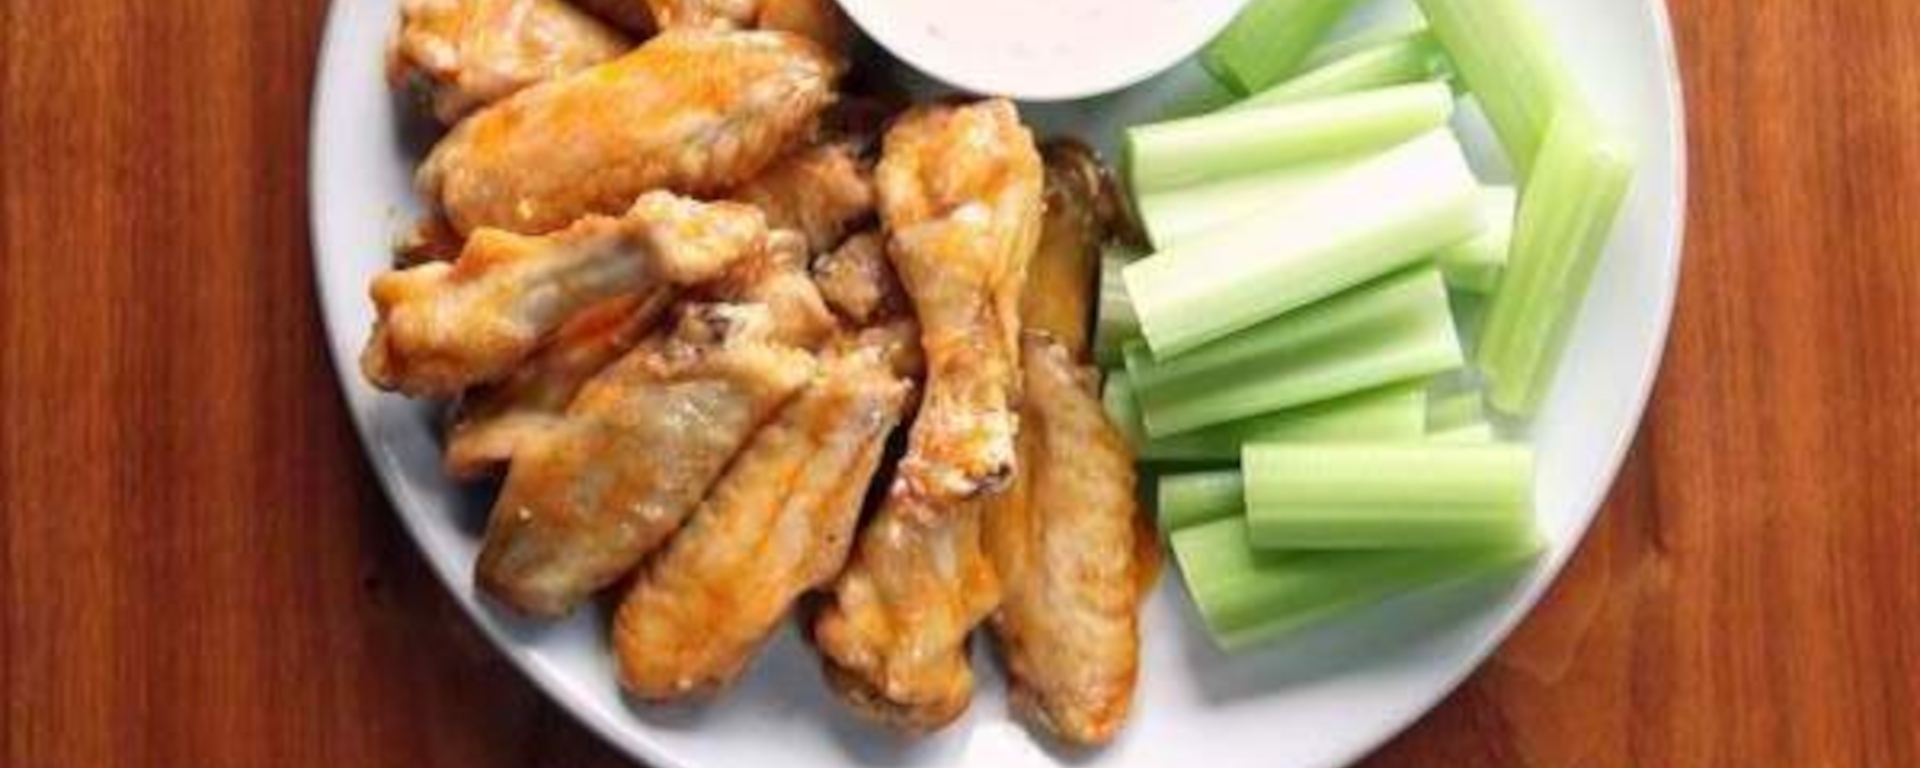 LuvMyRecipe.com - Buffalo Chicken Wings With Chunky Gorgonzola Cheese Dip Featured